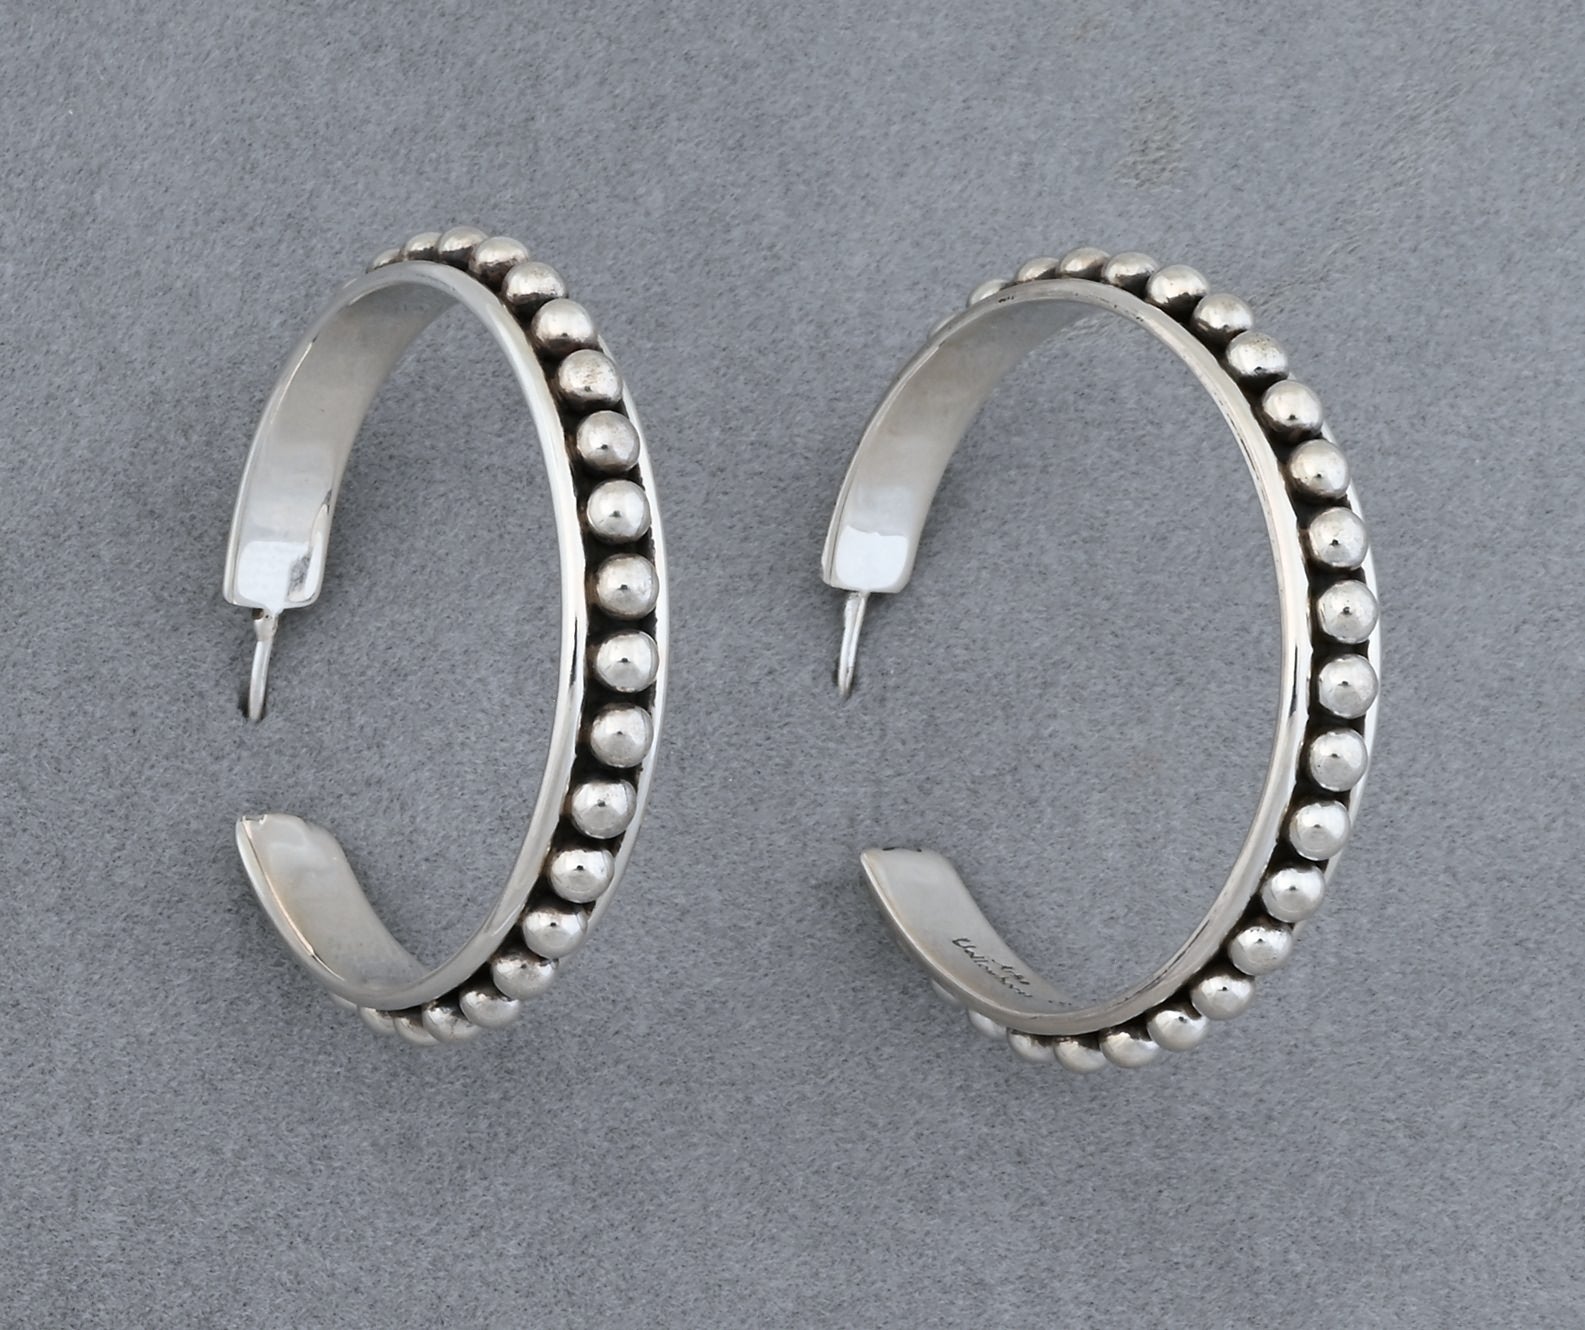 Earrings with Large Hoops by Artie Yellowhorse